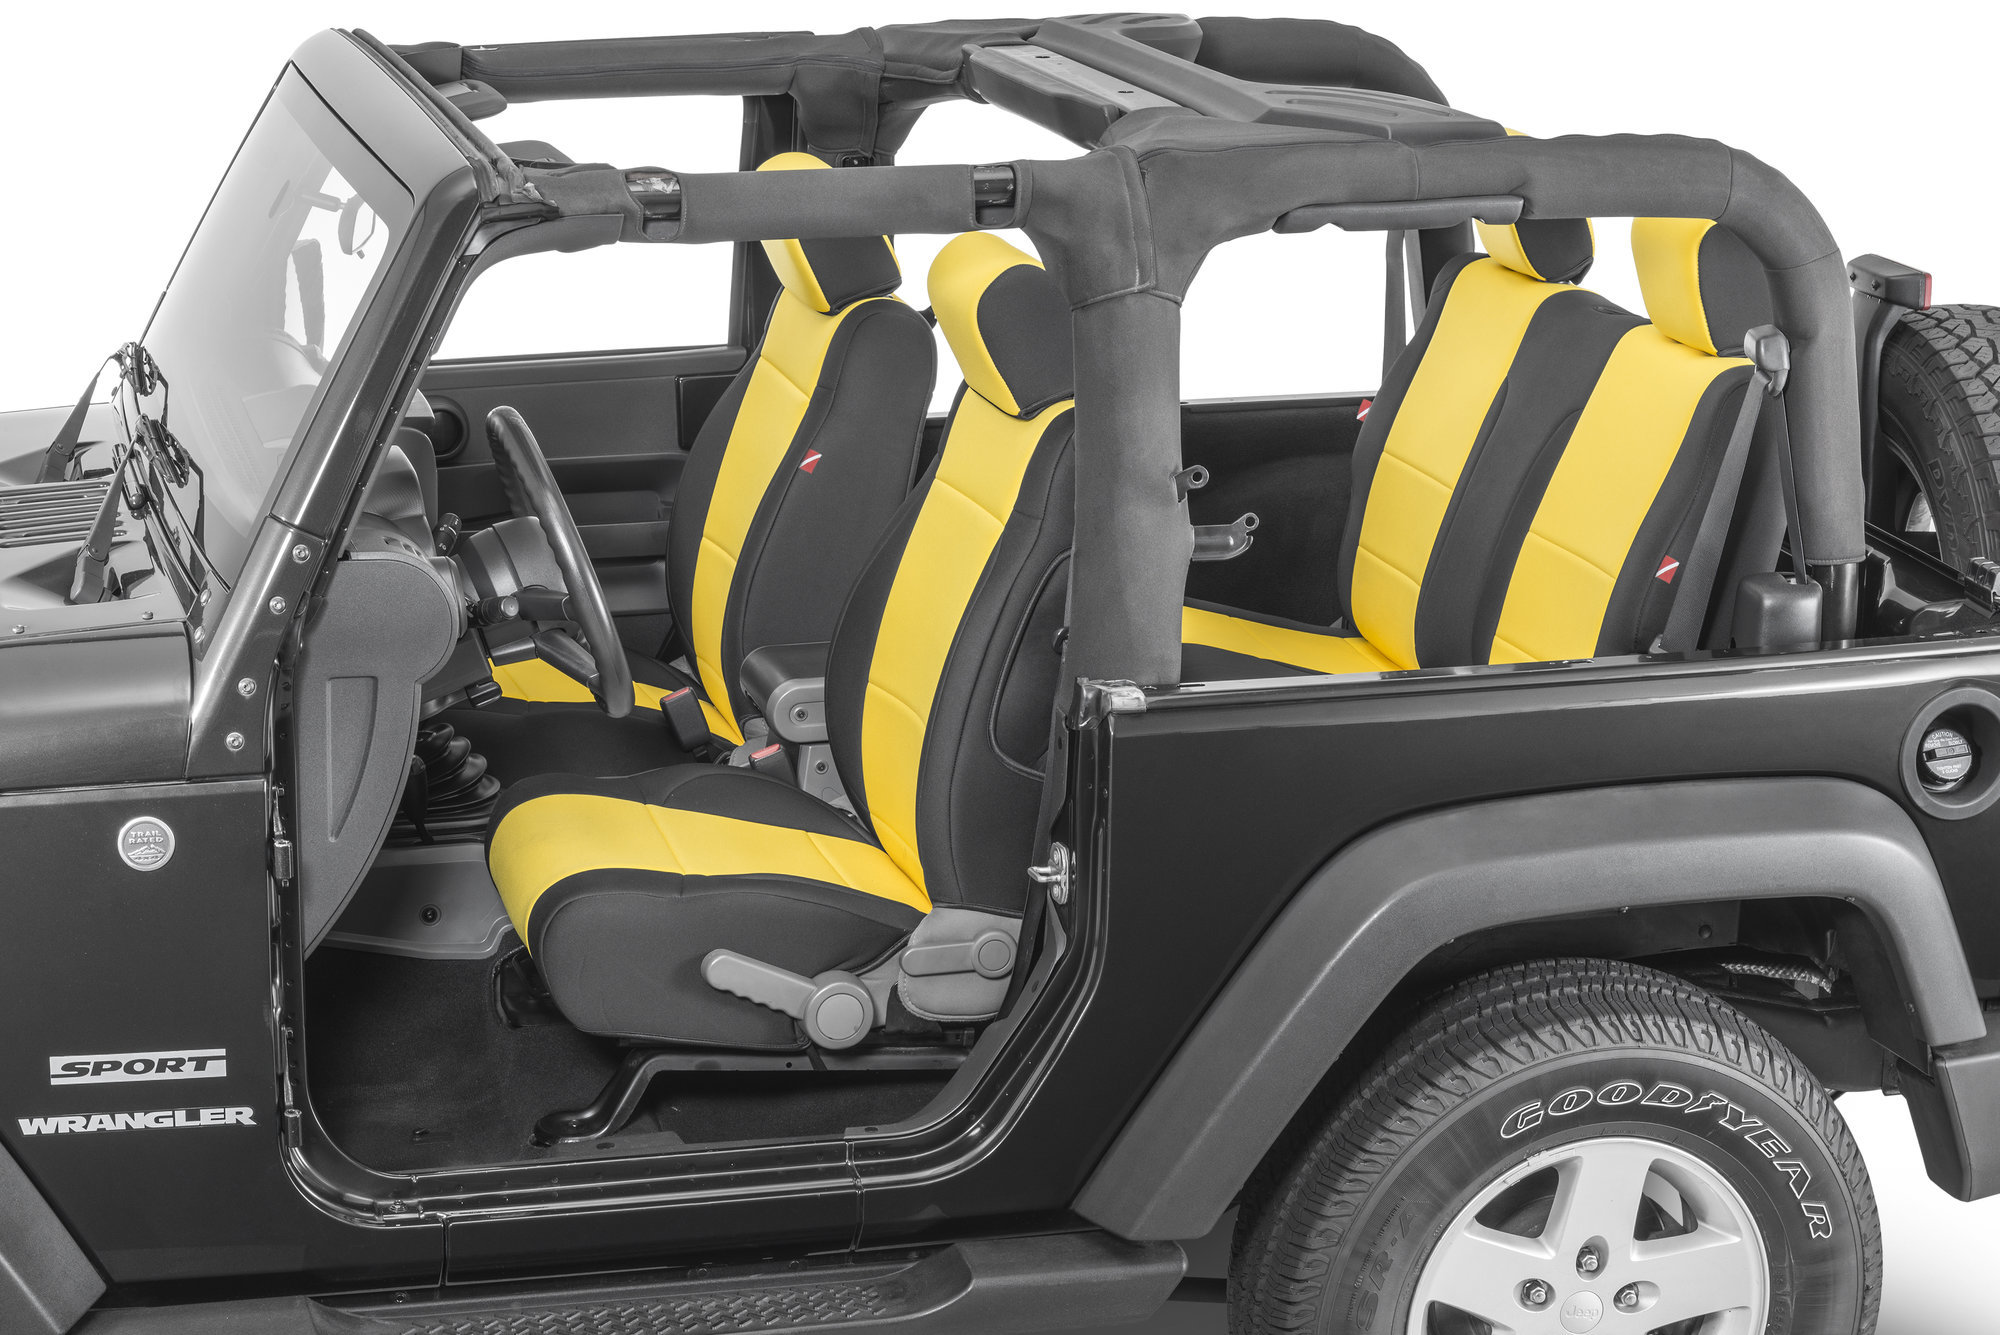 https://www.quadratec.com/sites/default/files/styles/product_zoomed/public/product_images/Quadratec-Diver-Down-Neoprene-Seat-Cover-07-17-Wrangler-JK-Yellow_0.jpg